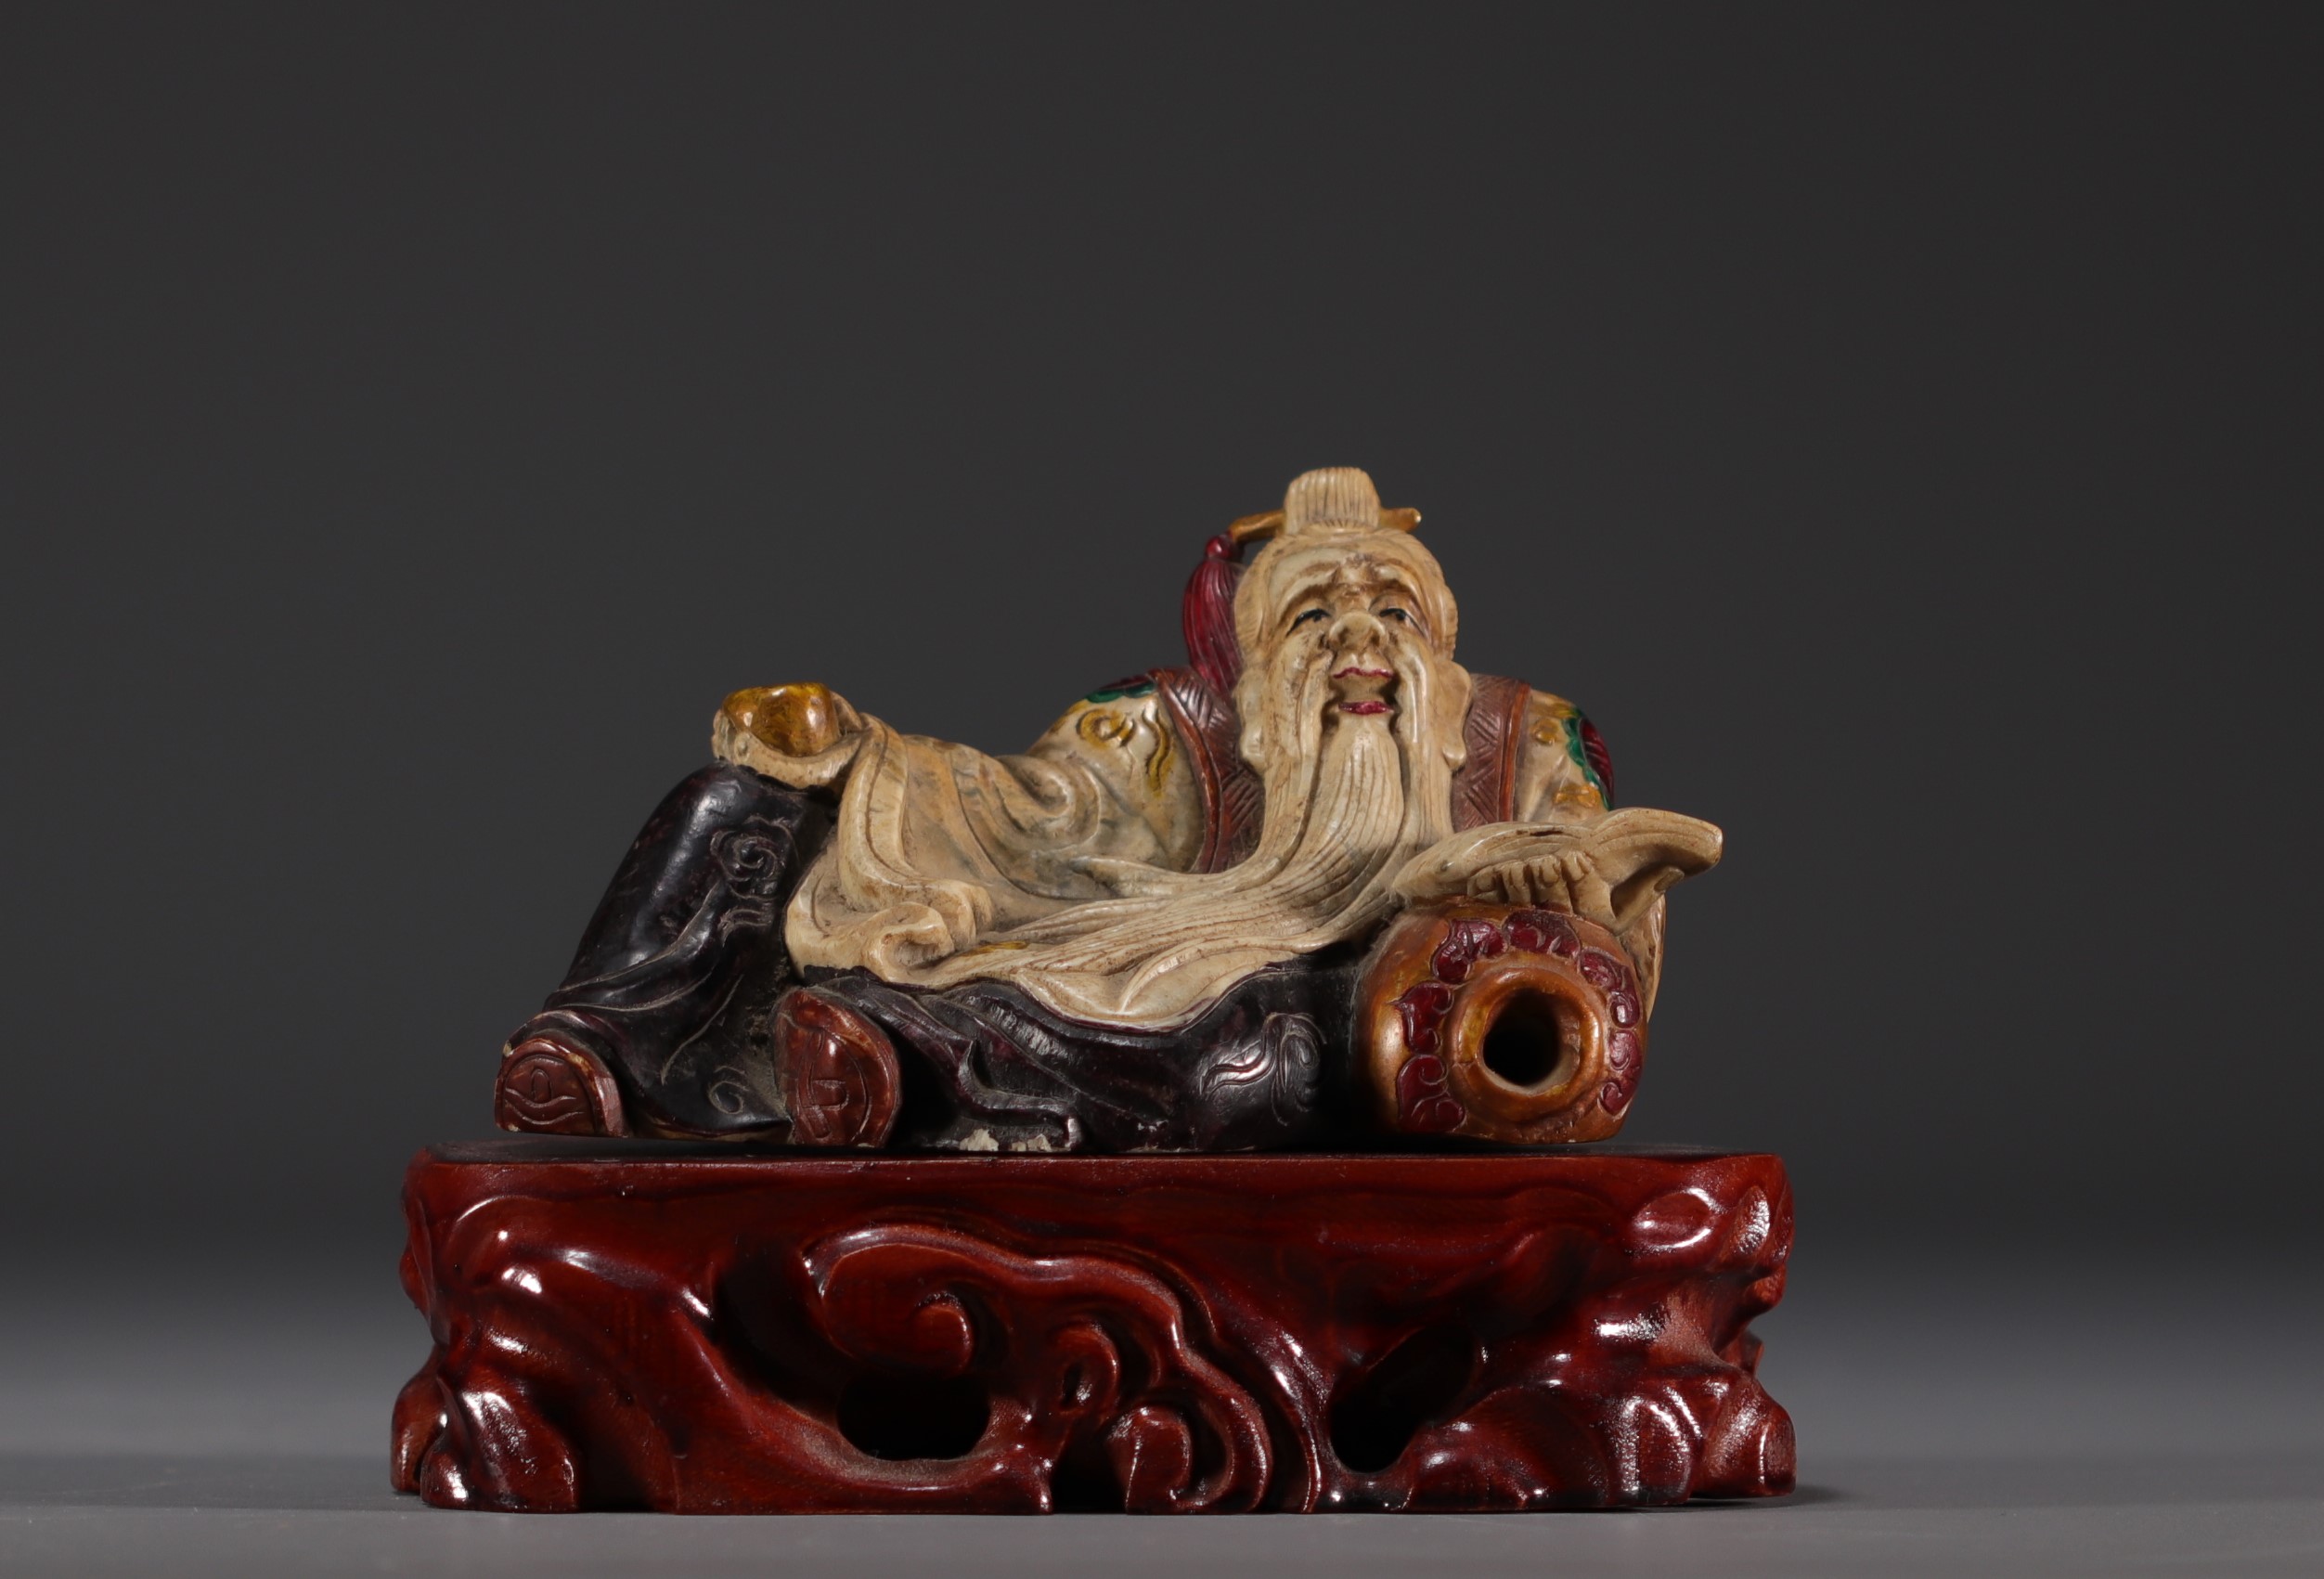 China - Polychrome stone sculpture of a Dignitary on a wooden base.